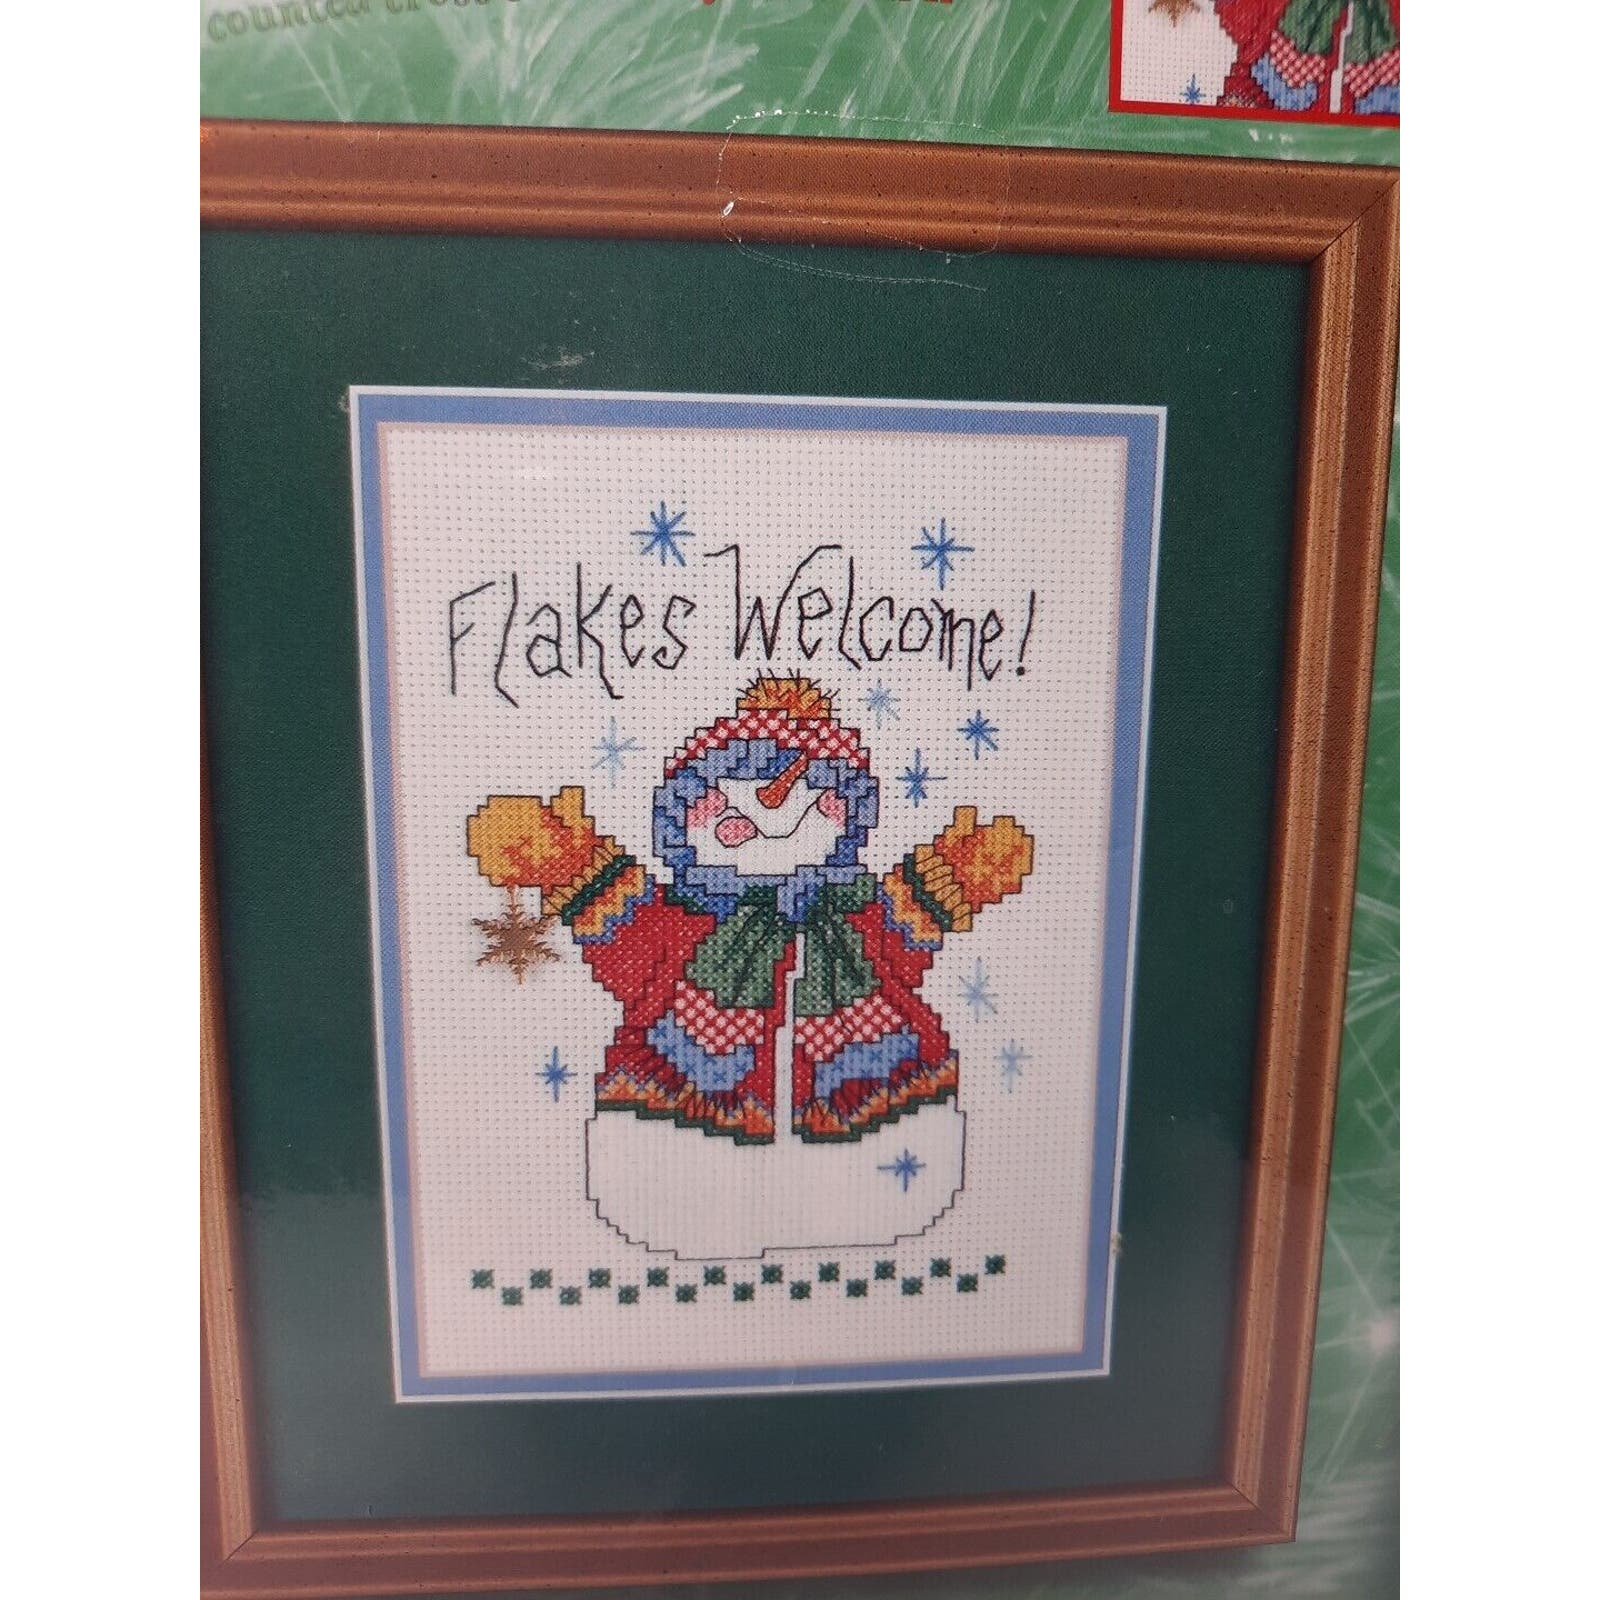 Xpressions by Bucilla Counted Cross Stitch Kit Flakes Welcome 84241 Snowman 5x7 bbUJzl05Z